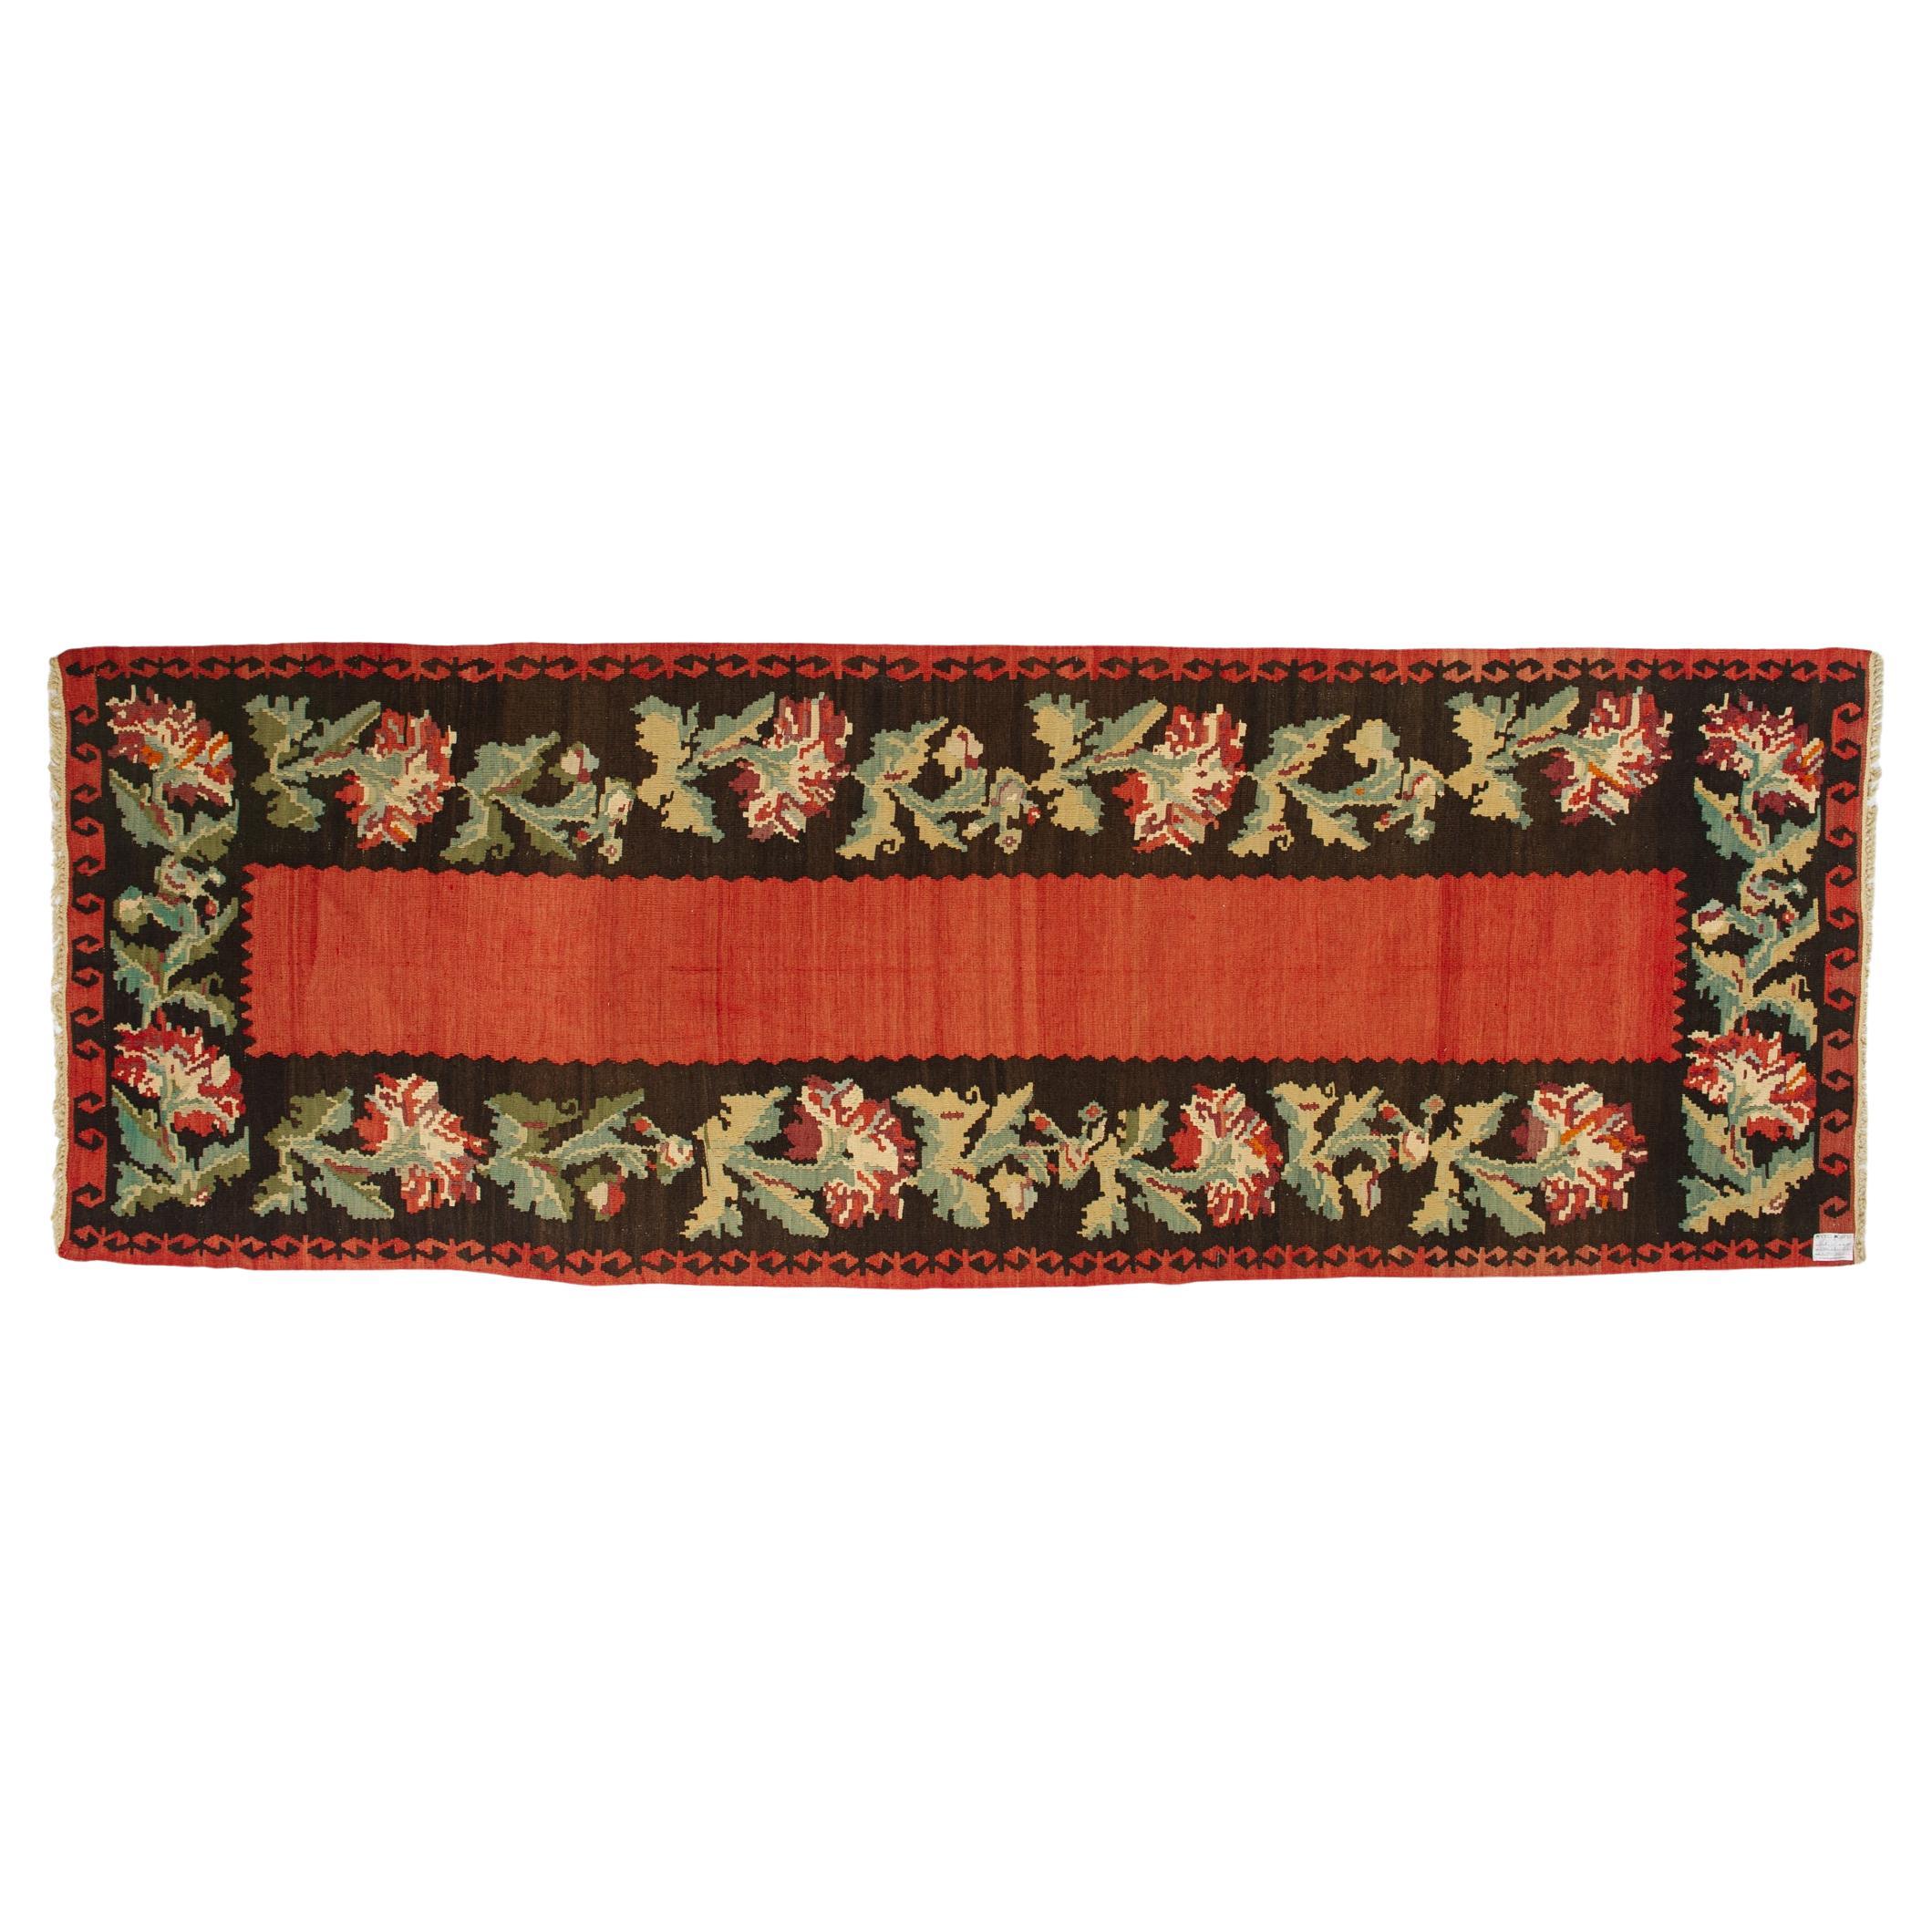 For this kilim: high black border with flowers and a plain red center part. Very elegant.
Settable also in a modern house: in order to change the point of view.